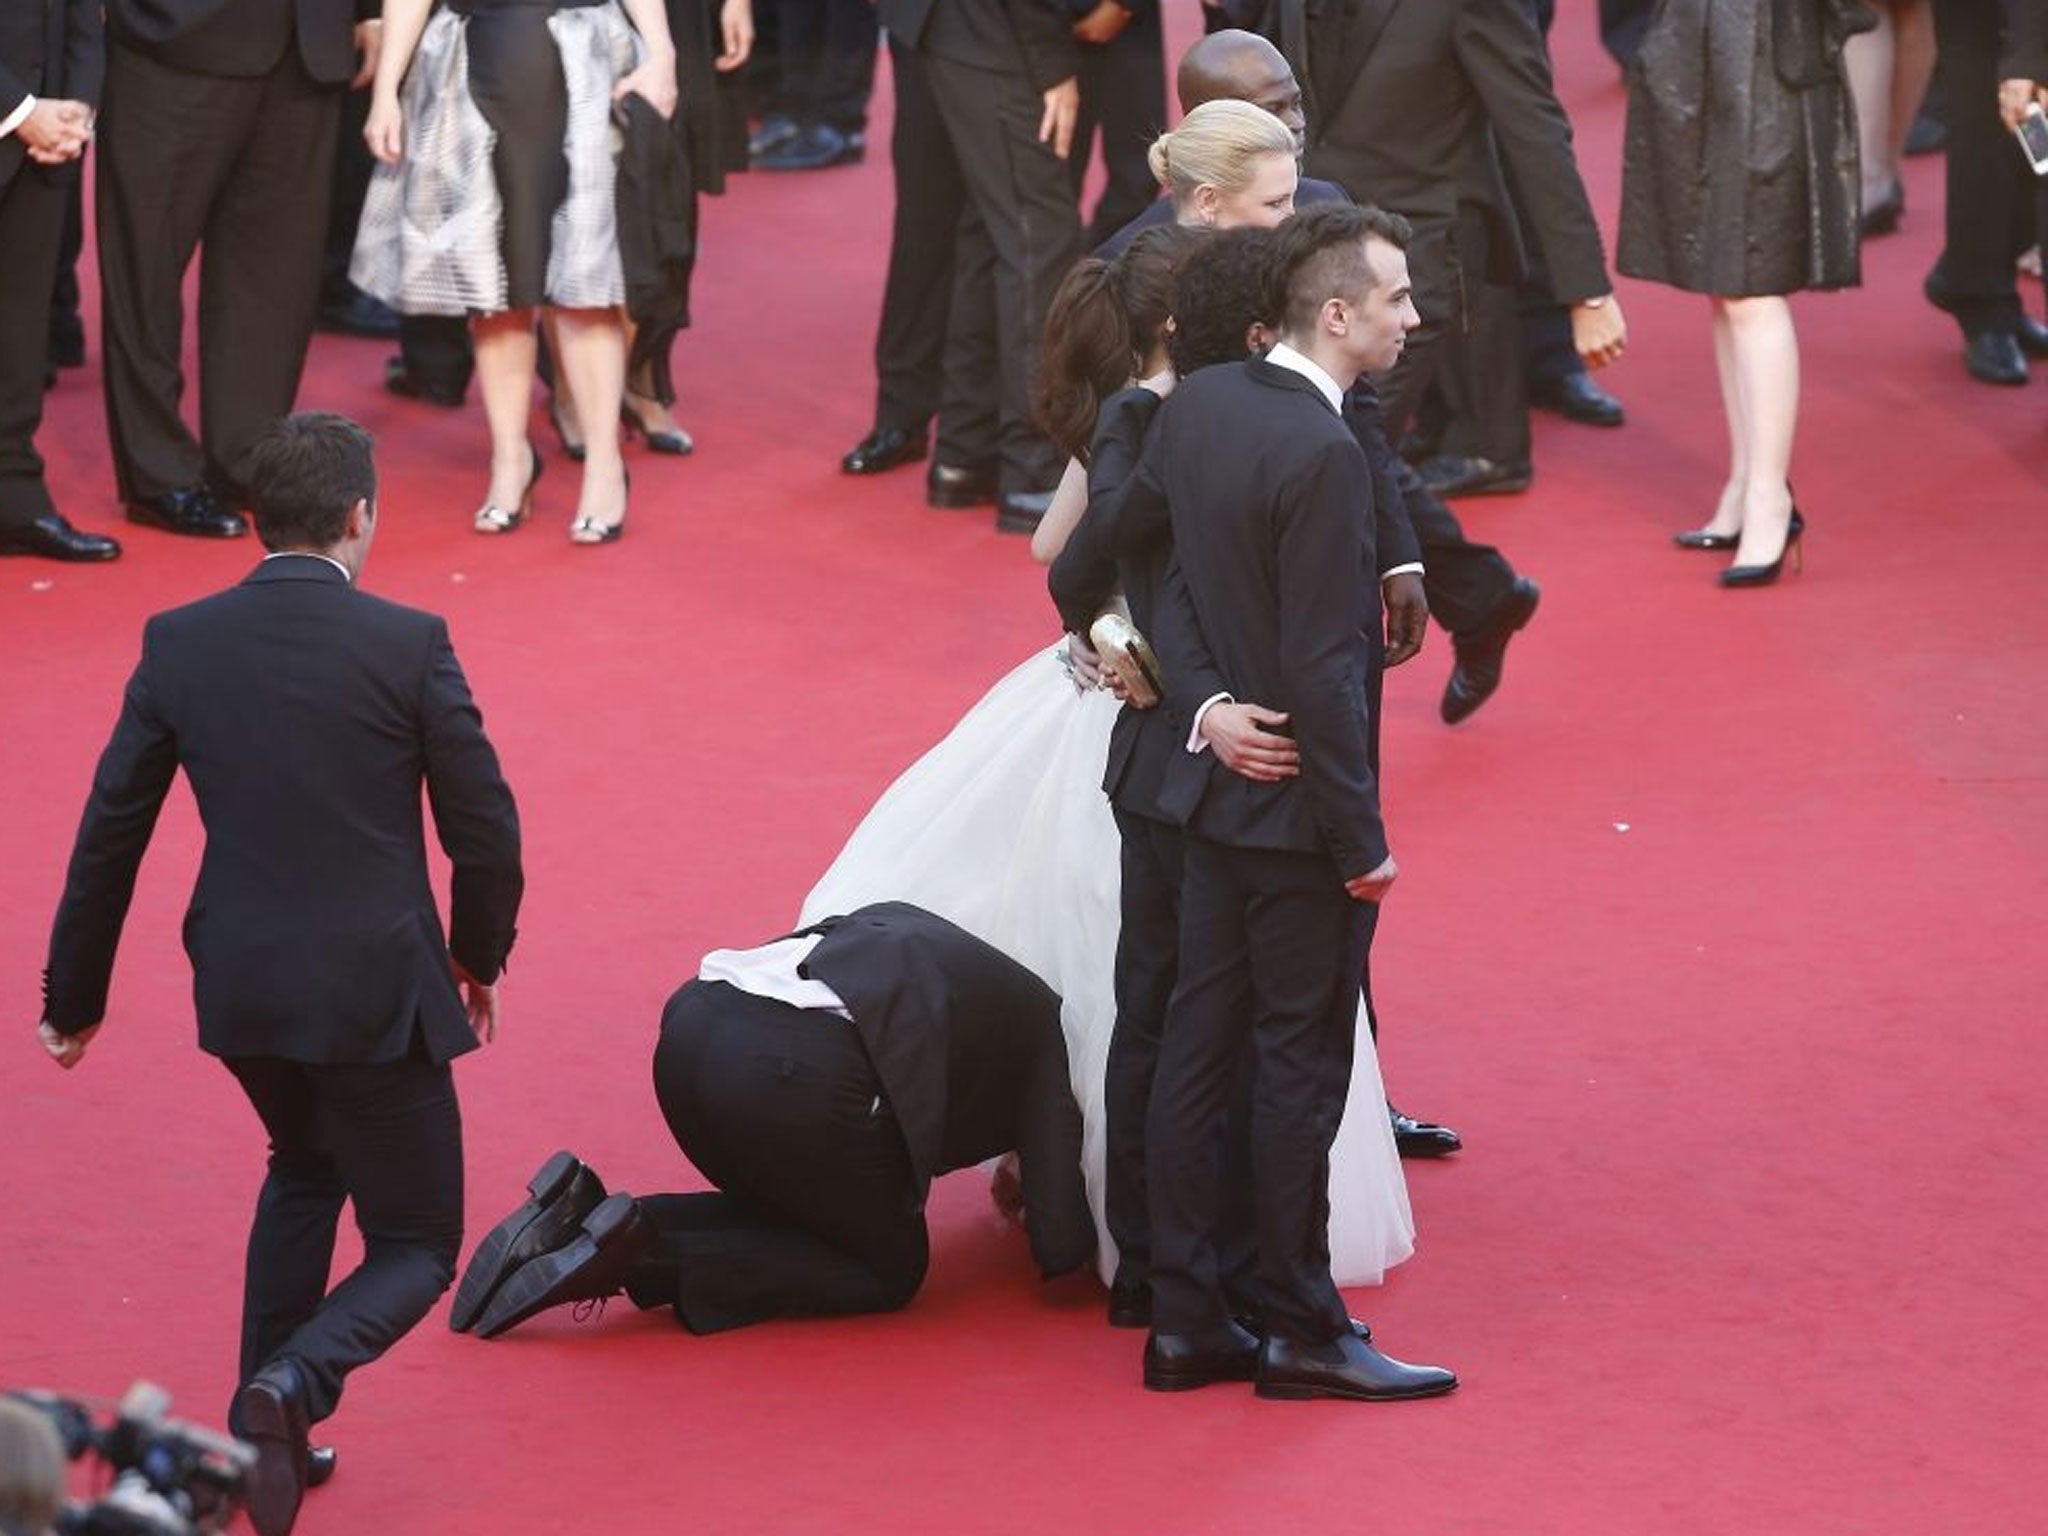 Photographers caught the moment the prankster crawled under Ferrera's gown